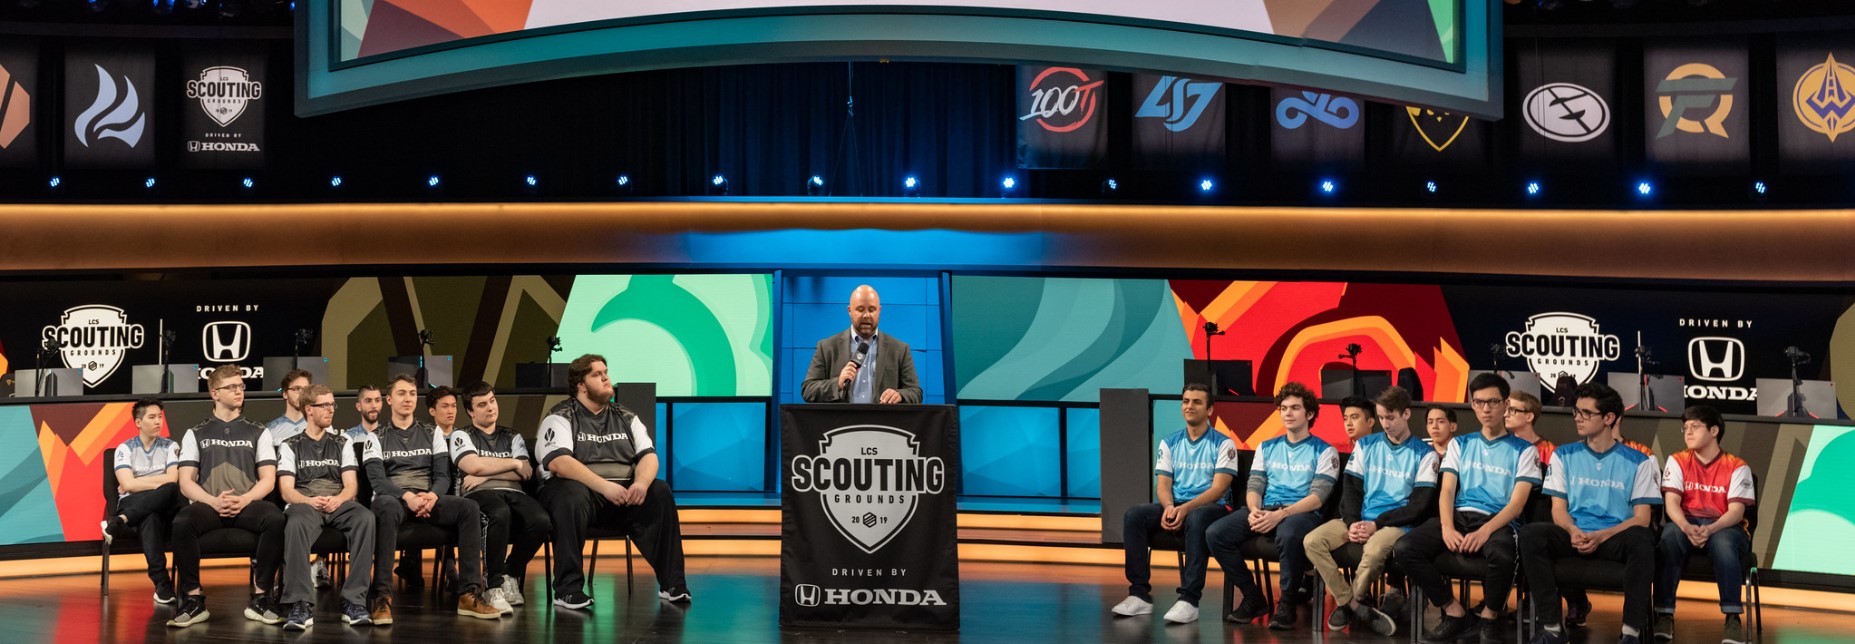 2020 Honda Scouting Grounds Power Rankings (Analysis on All 20 Players)